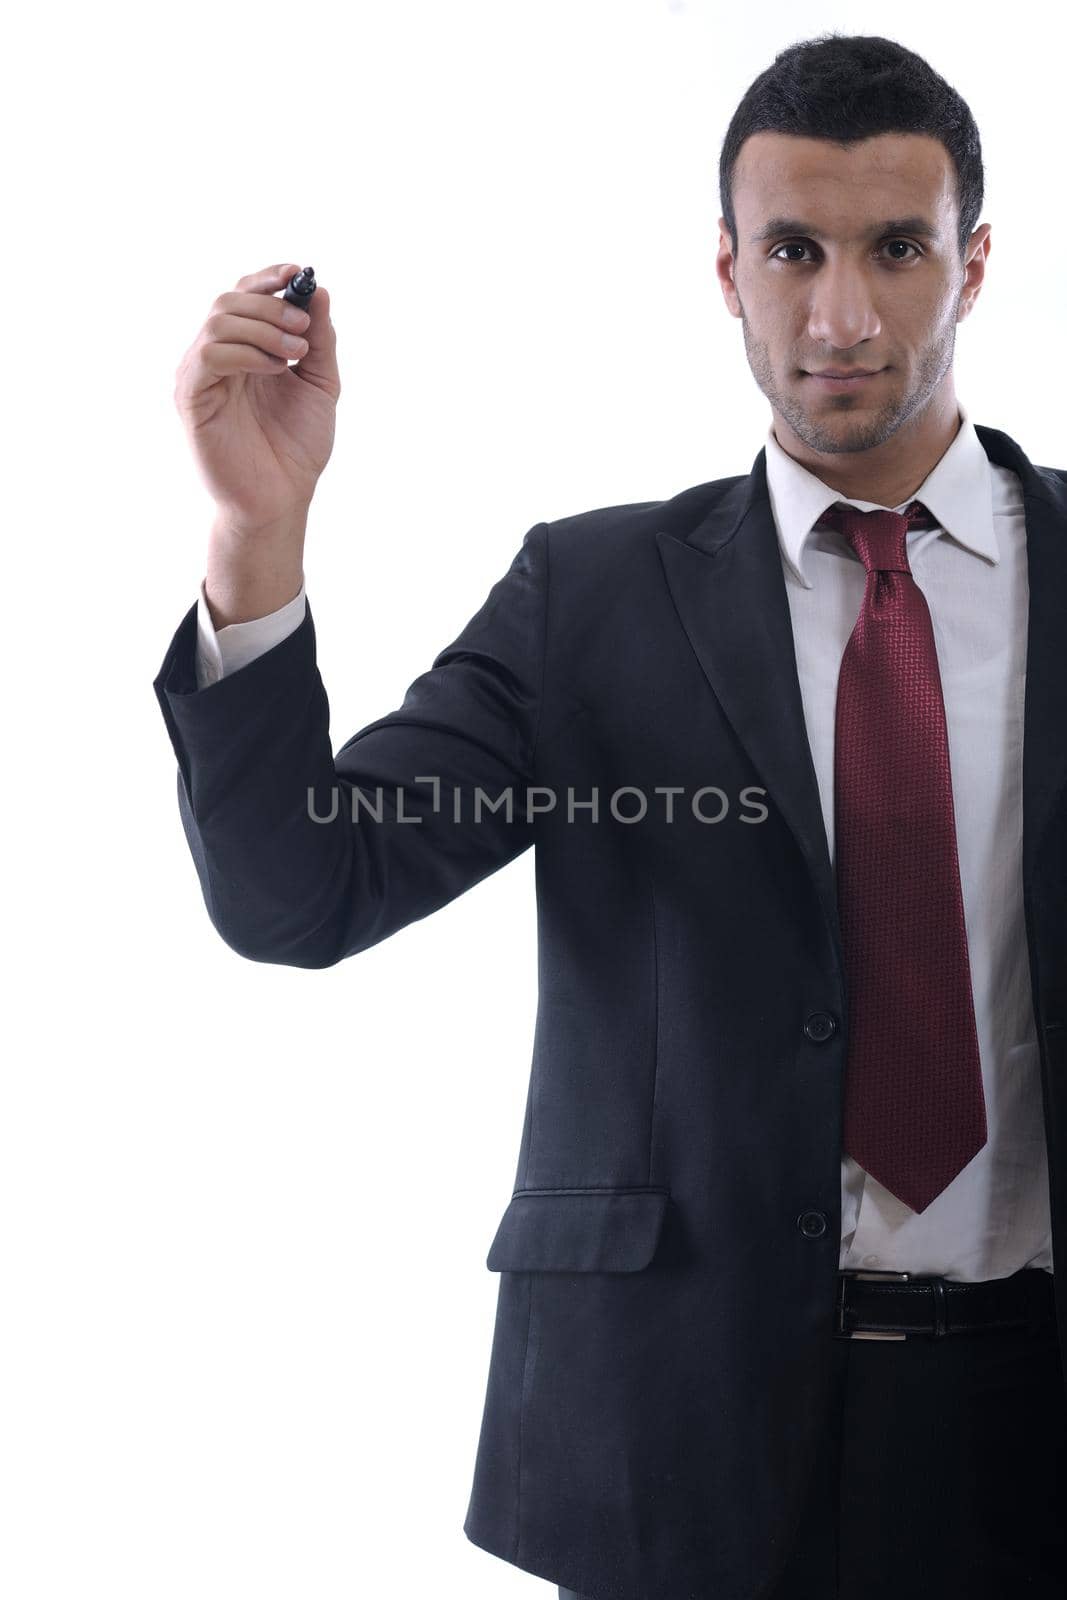 business man draw with marker on empty copy space isolated on white in studio